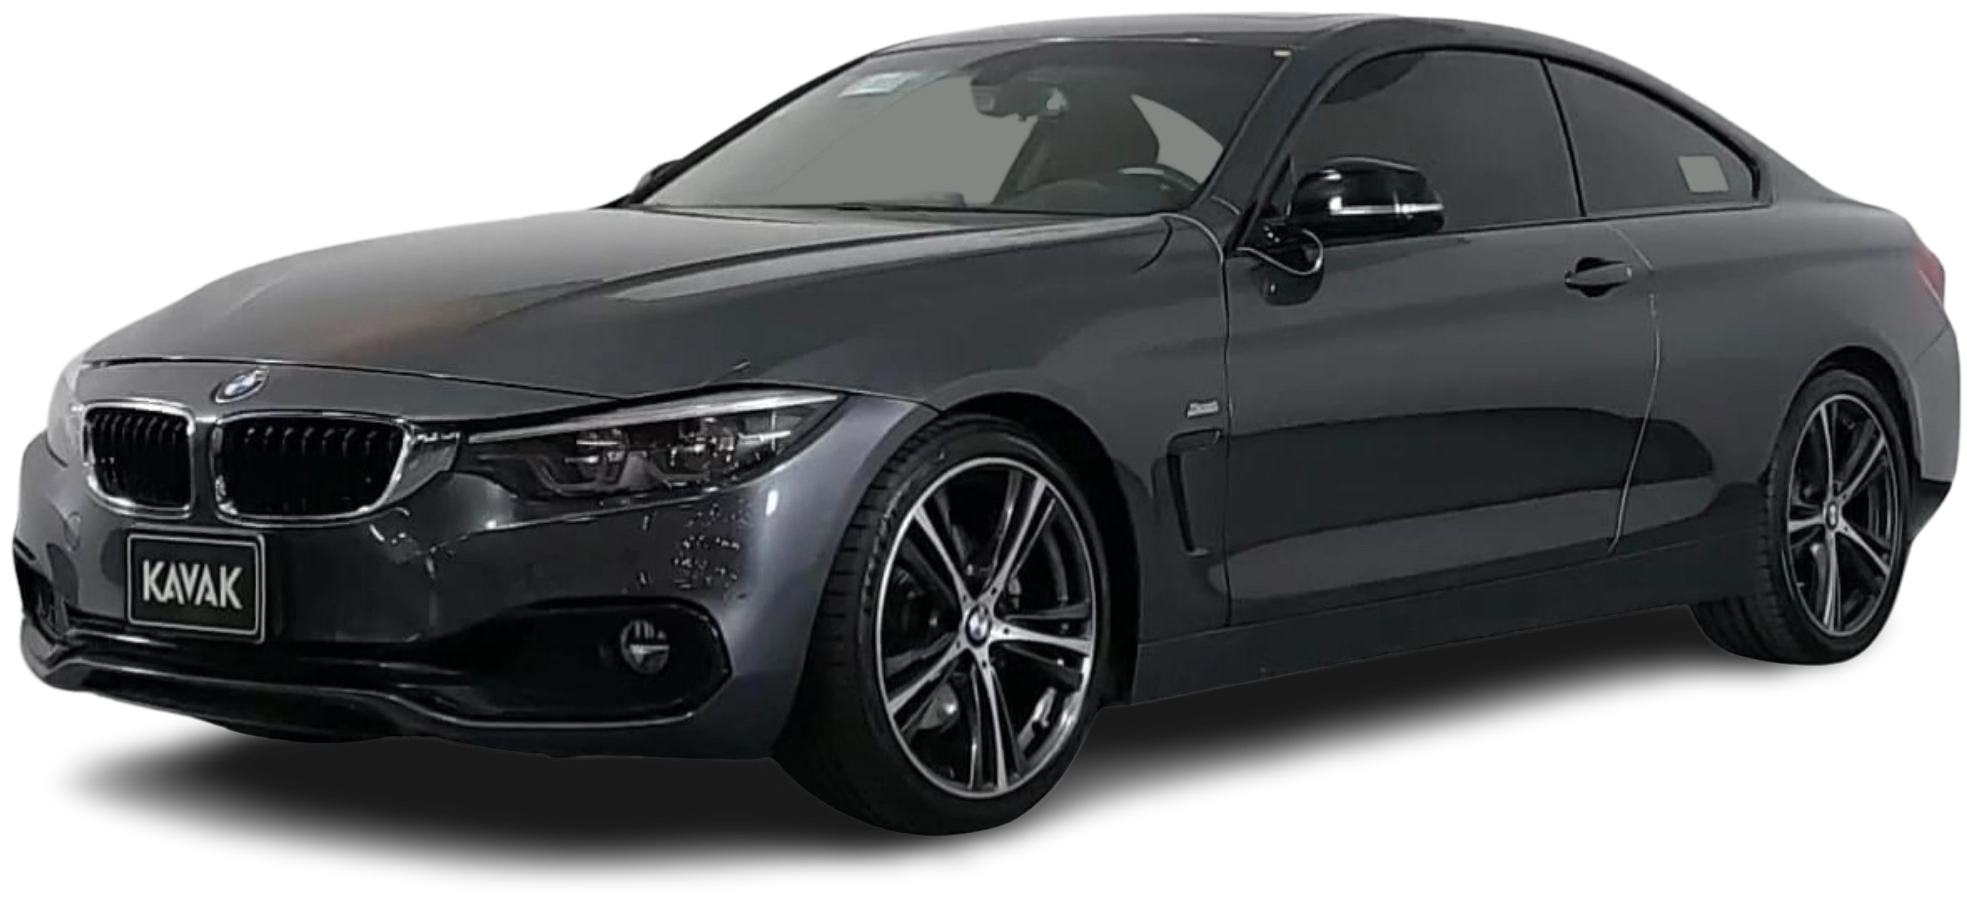 Bmw Serie 4 Coupe 2020 2019 2018 2017 2016 2015 2014